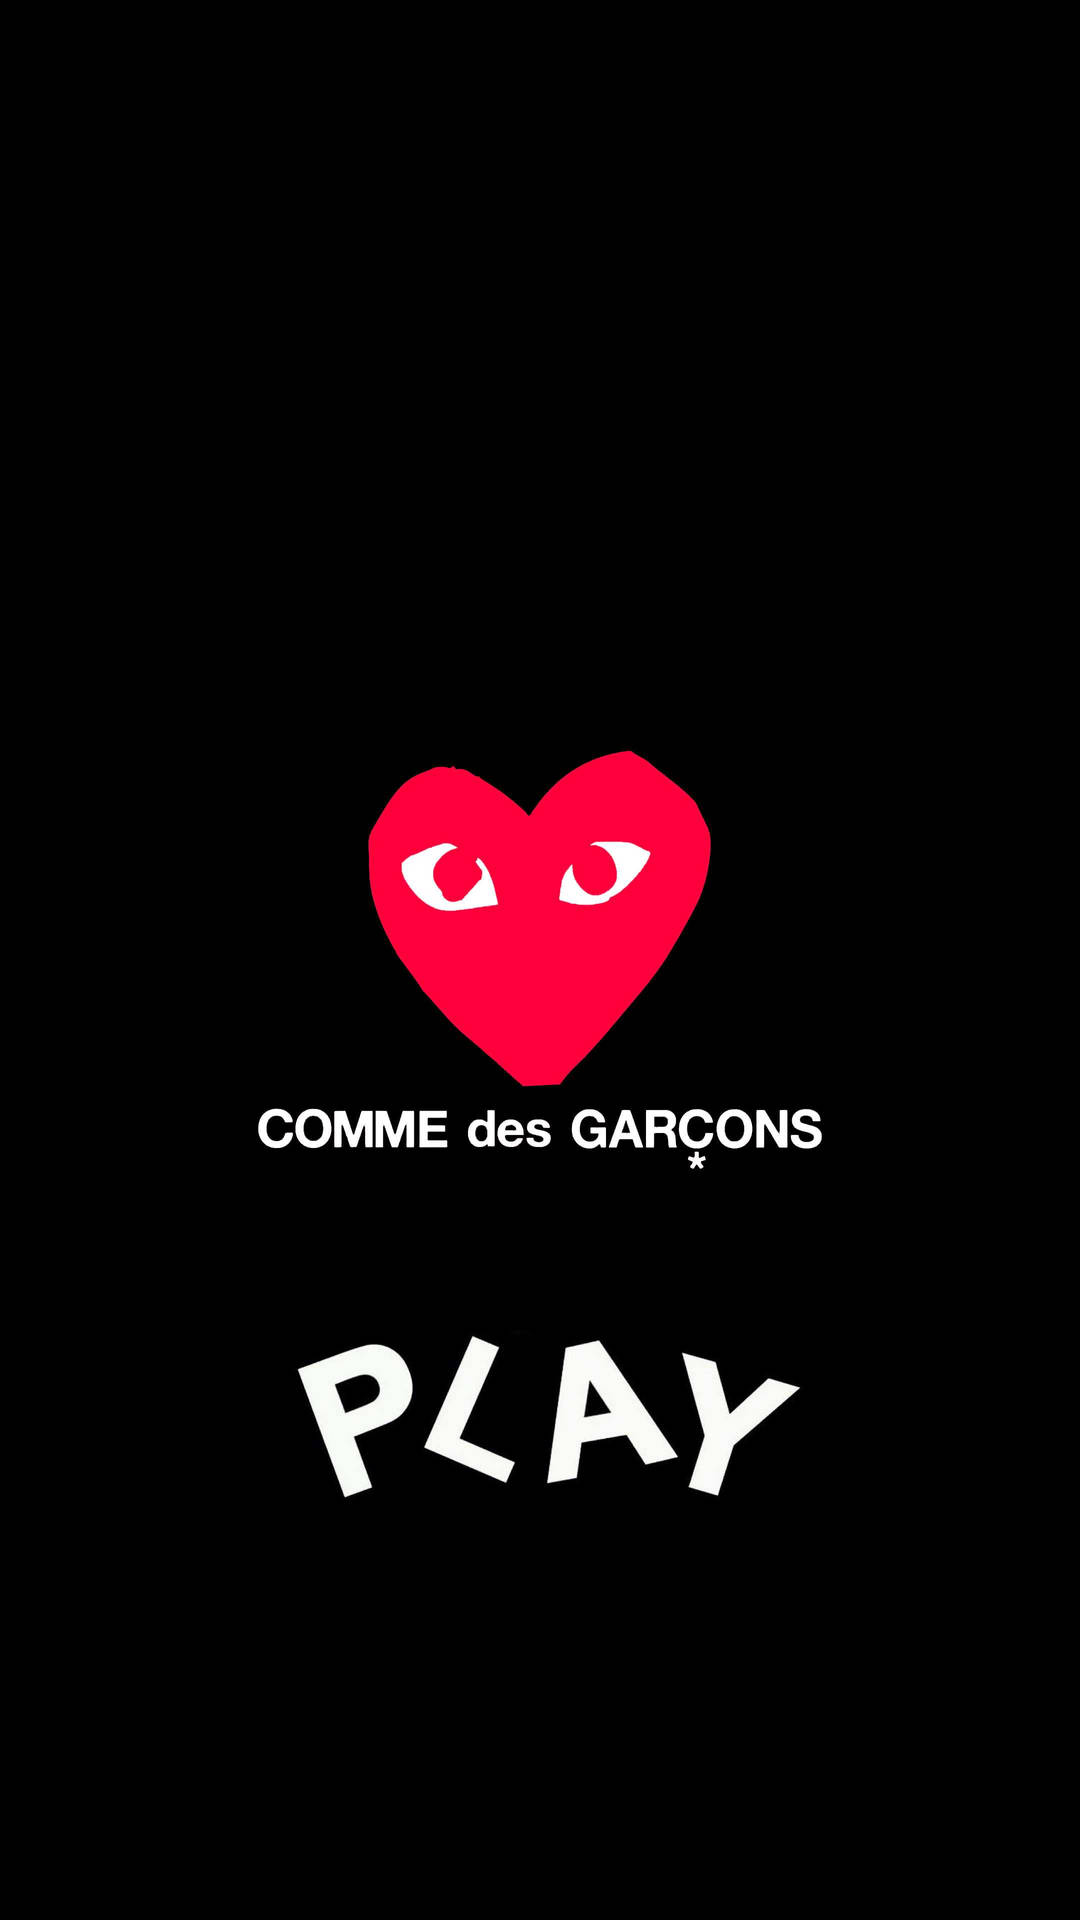 Cdgcomme Des Garcons Play - Cdg Comme Des Garcons Play. Wallpaper